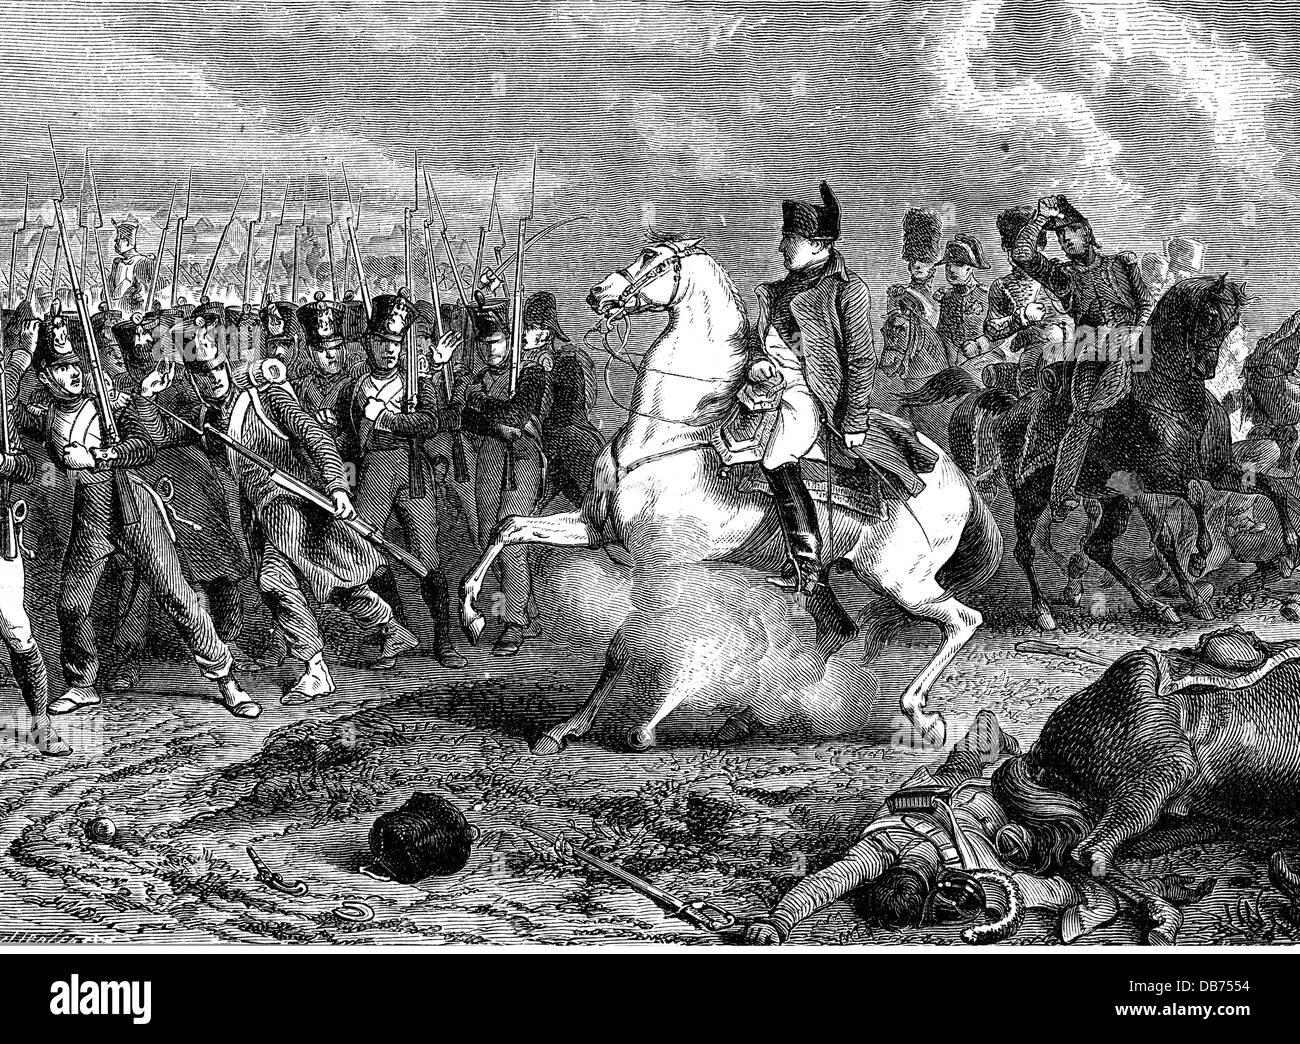 War of the Sixth Coalition 1812 - 1814, Battle of Arcis-sur-Aube, 20. - 21.3.1814, shell explodes under the horse of emperor Napoleon I, wood engraving, 2nd half 19th century, Bonaparte, soldiers, soldier, campaign, campaigns, France, Napoleonic wars, war, wars, 6th, sixth, Arcis sur Aube, Champagne, historic, historical, people, Additional-Rights-Clearences-Not Available Stock Photo